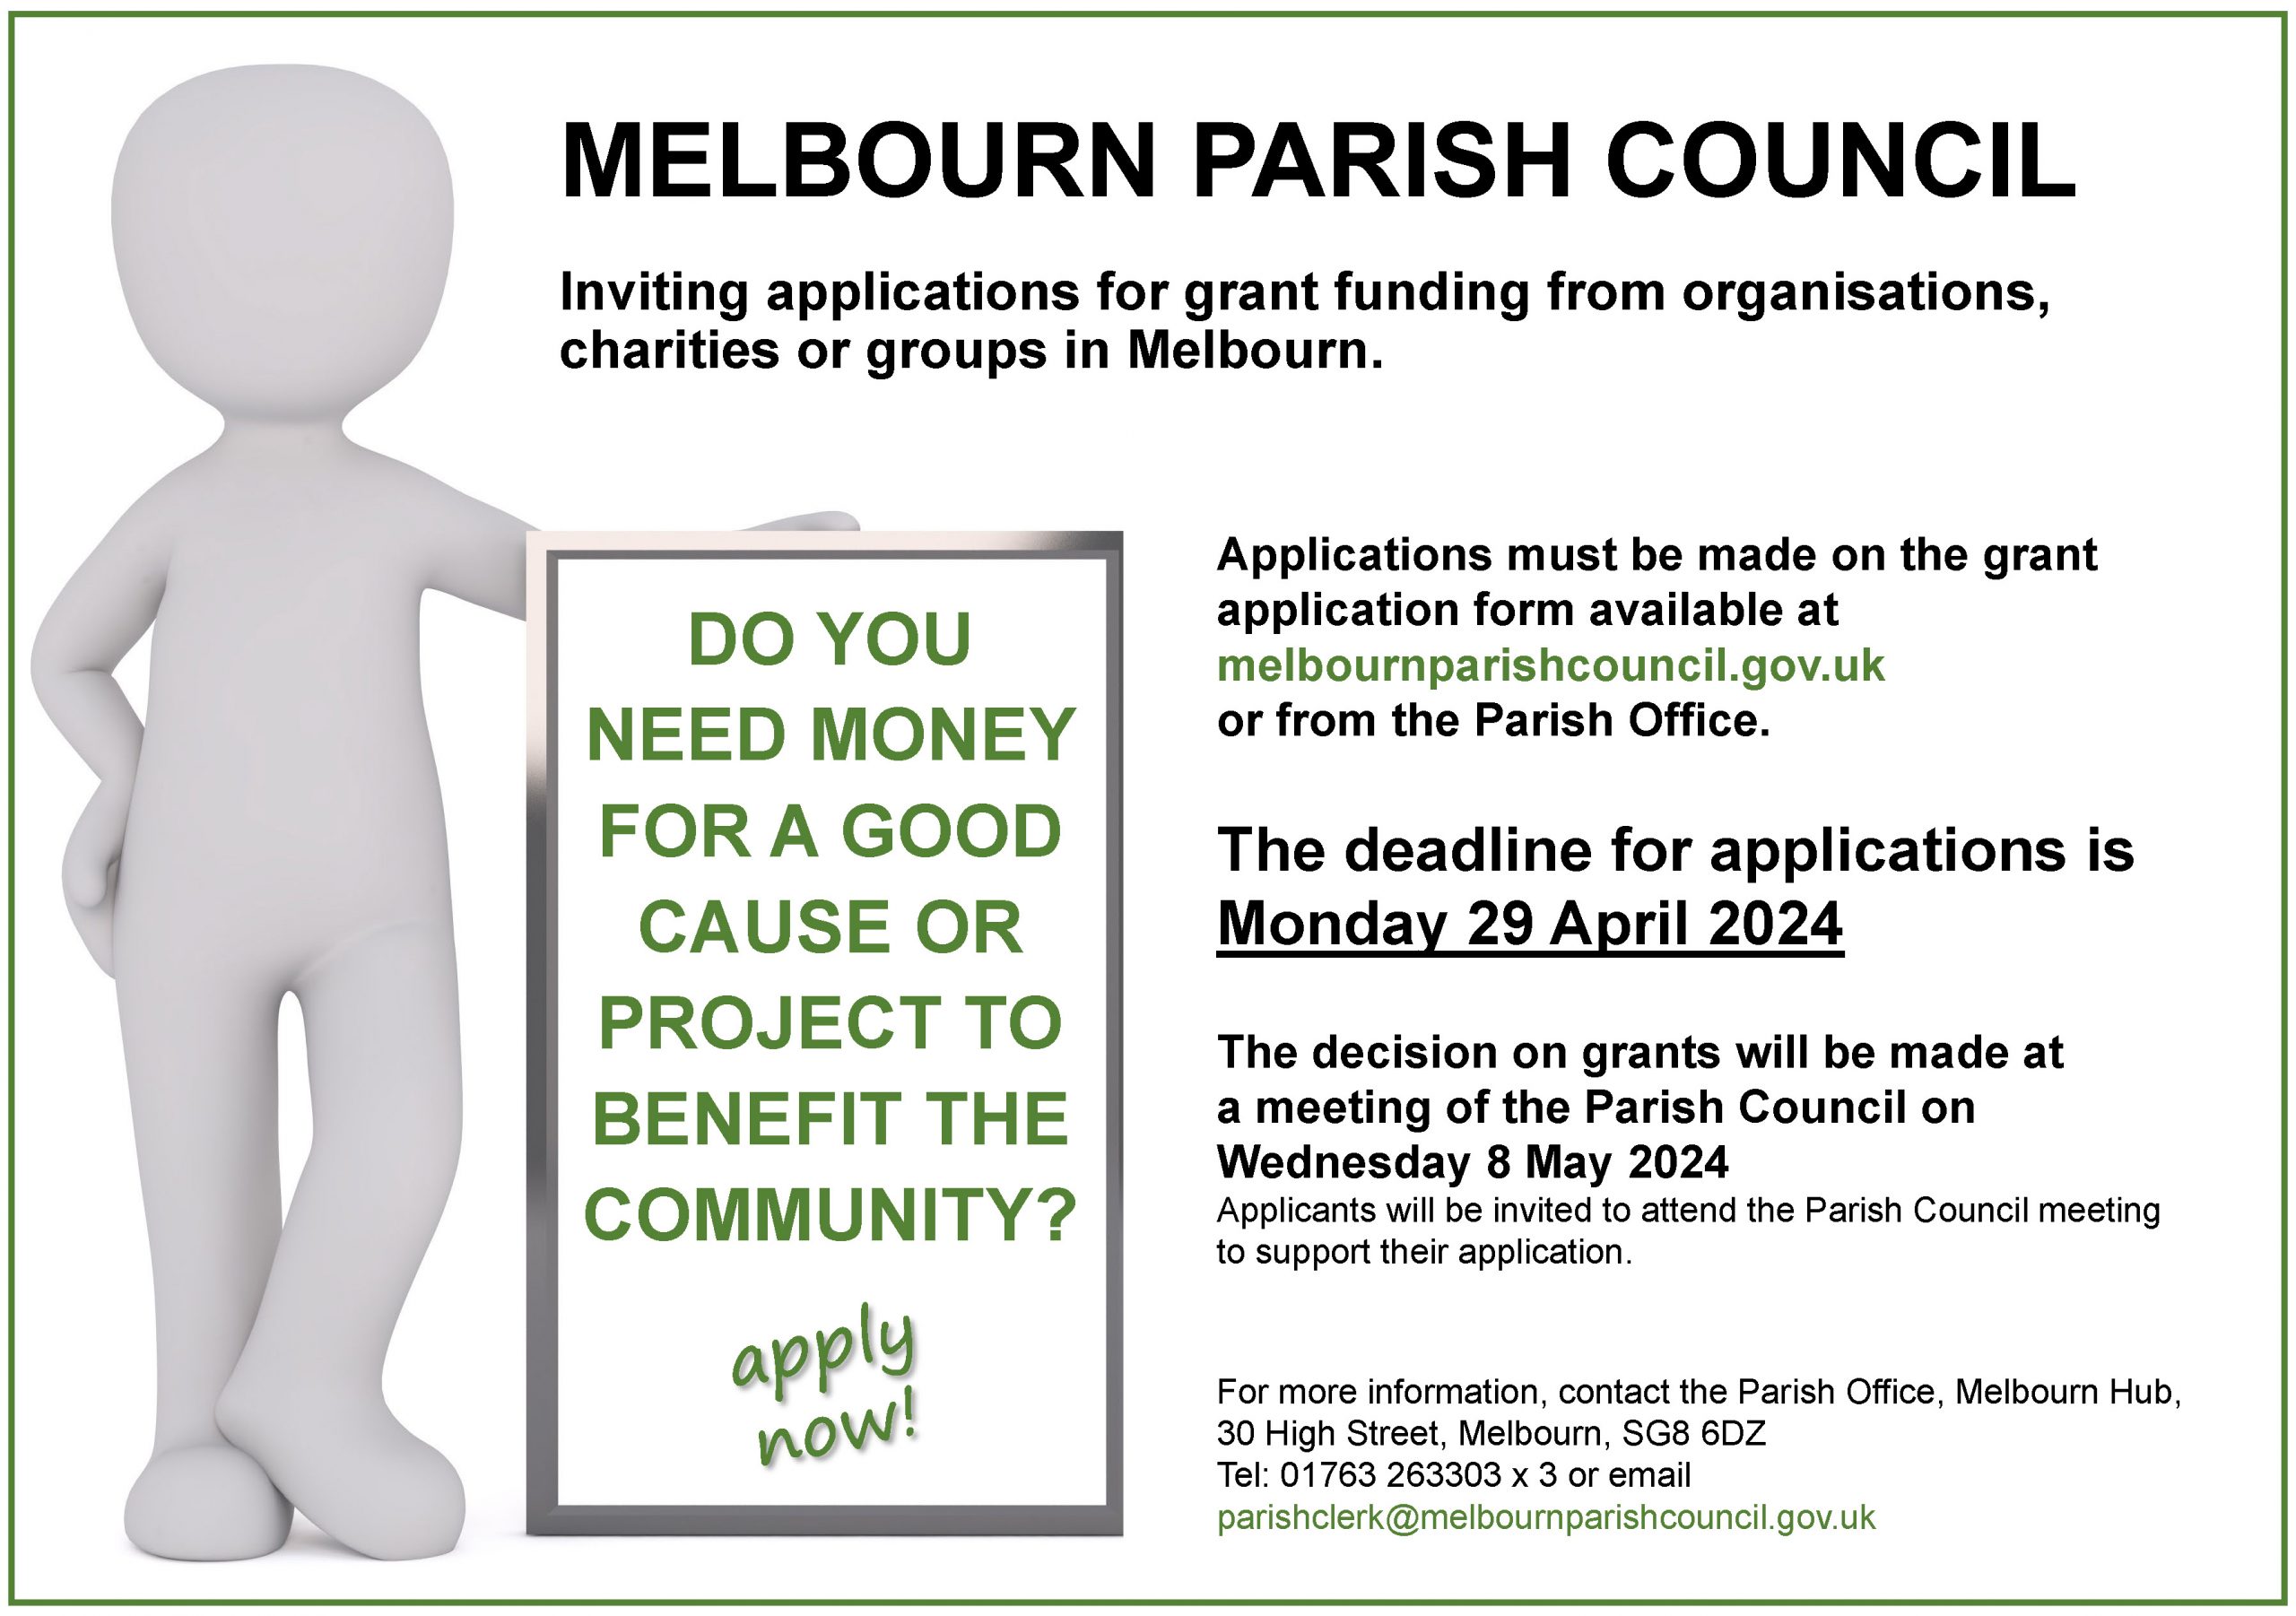 Poster advertising the Melbourn Parish Council community grant applications